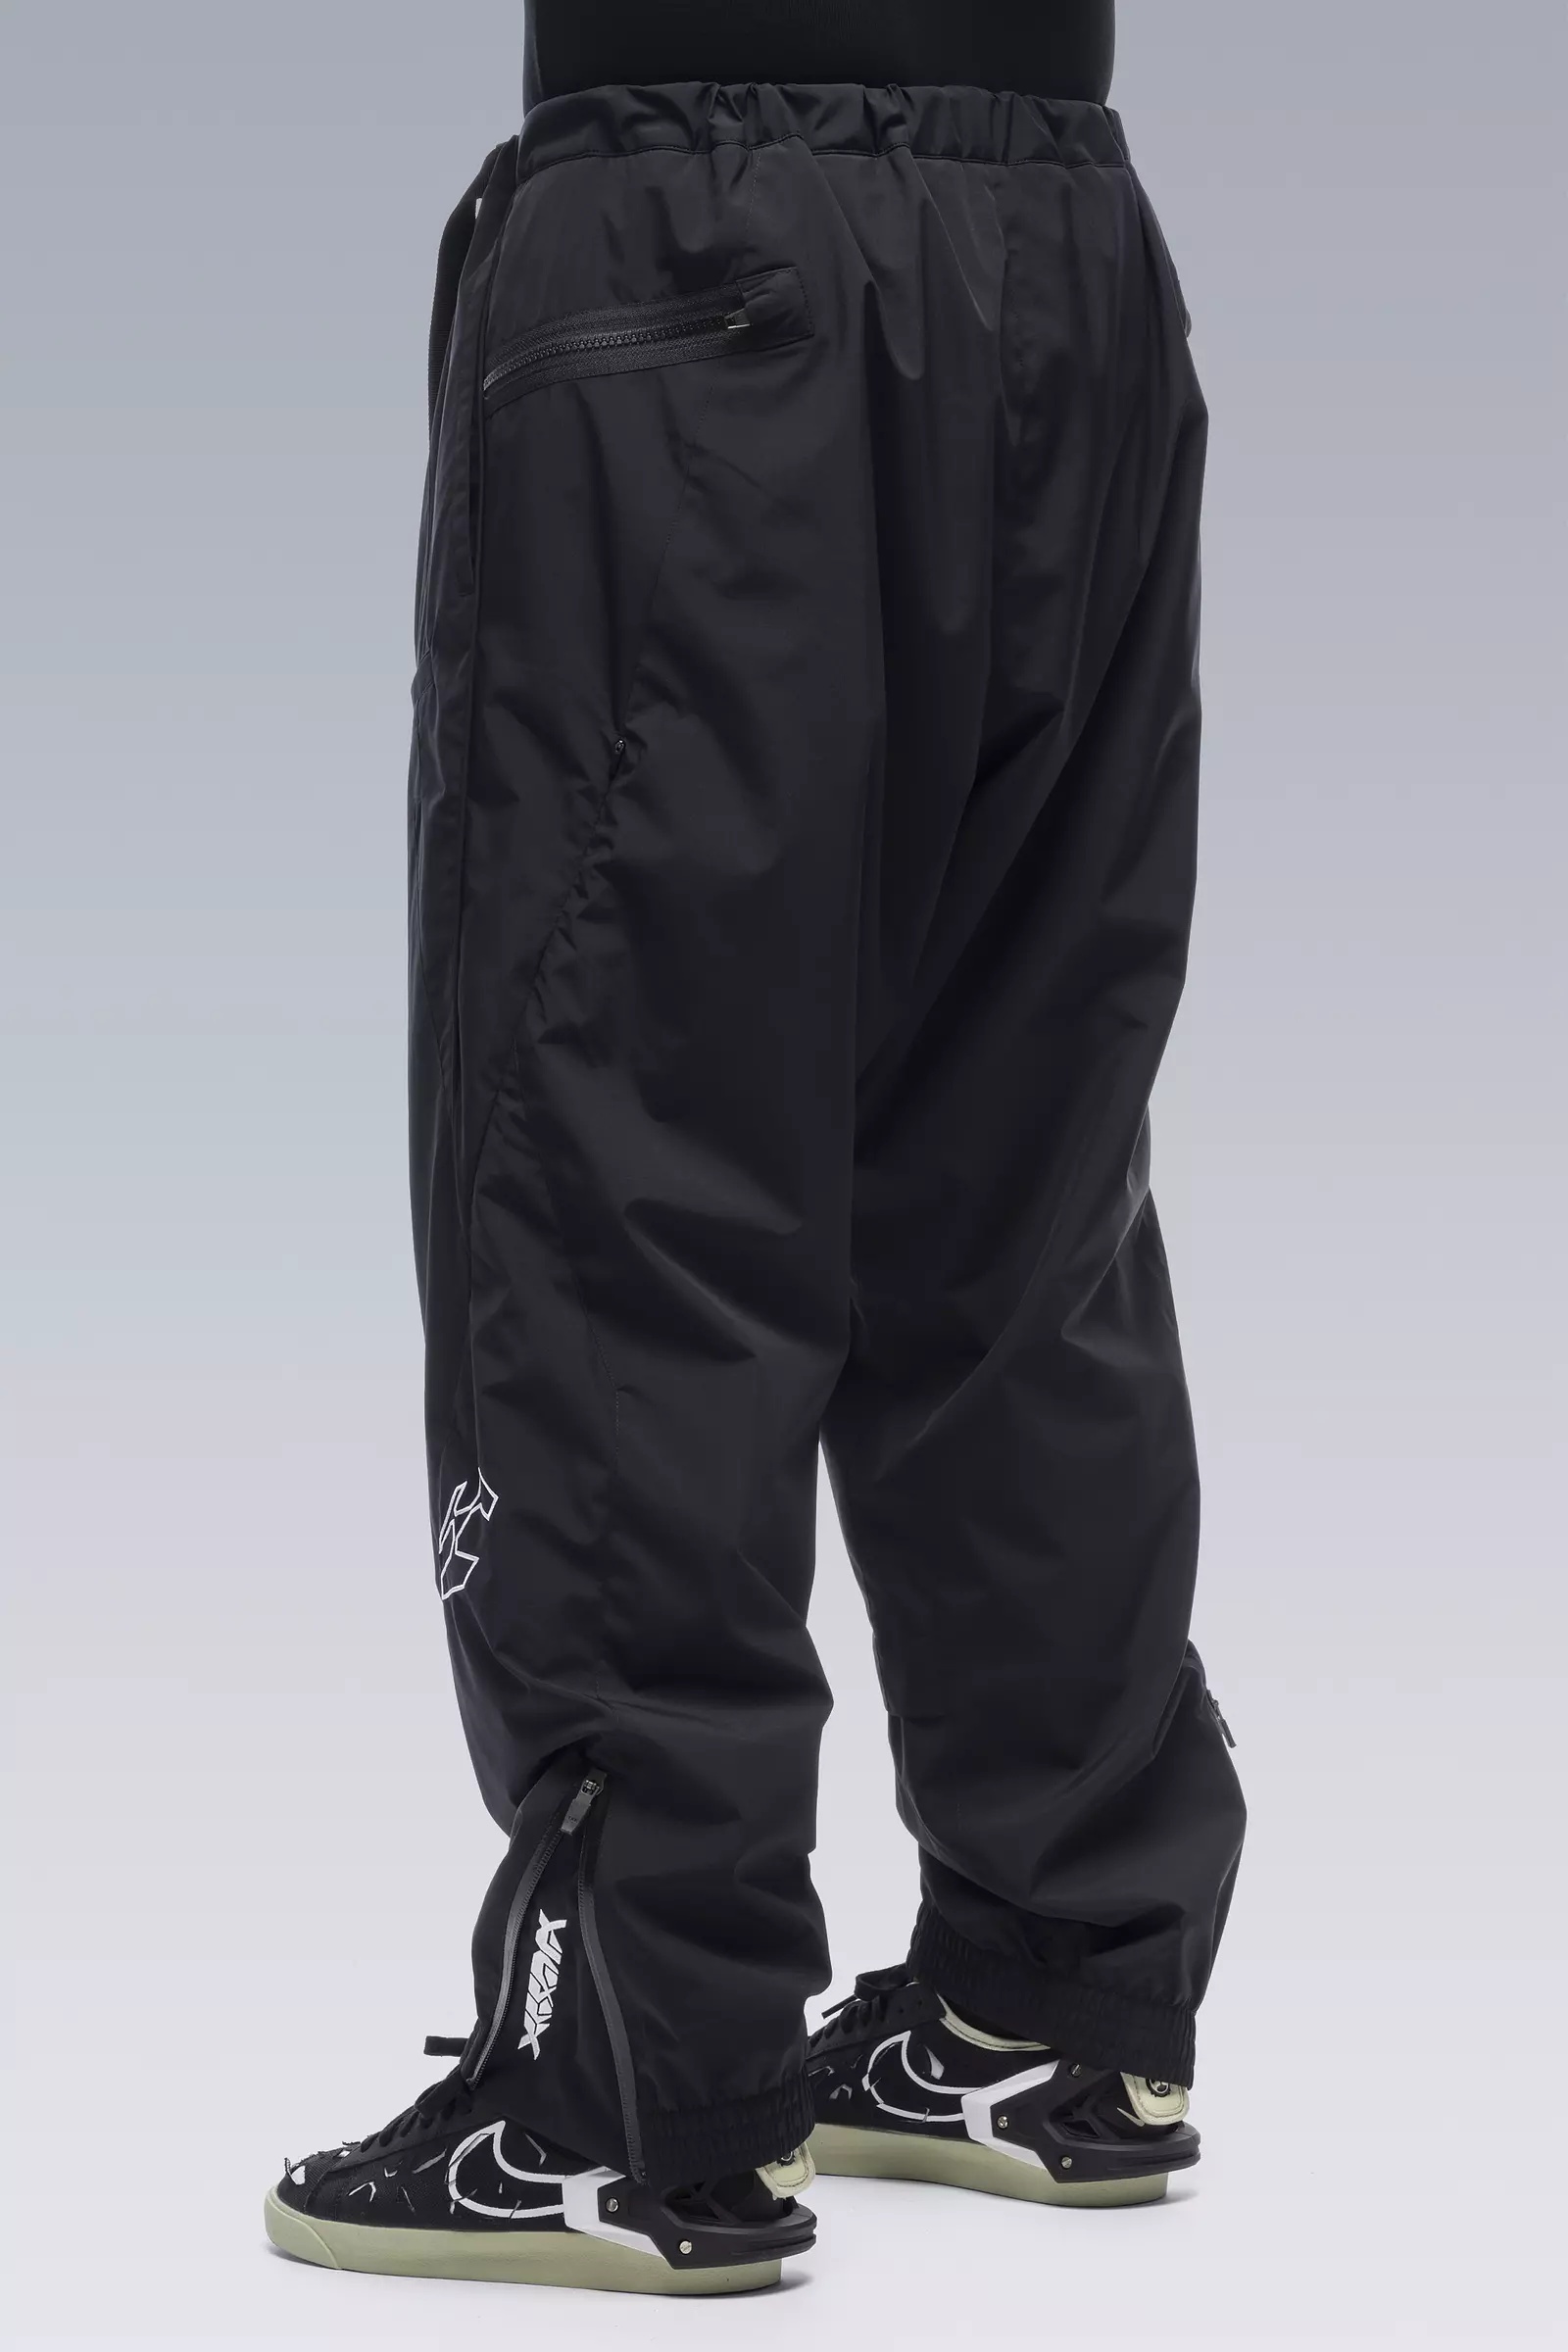 P53-WS 2L Gore-Tex® Windstopper® Insulated Vent Pants Black - 8